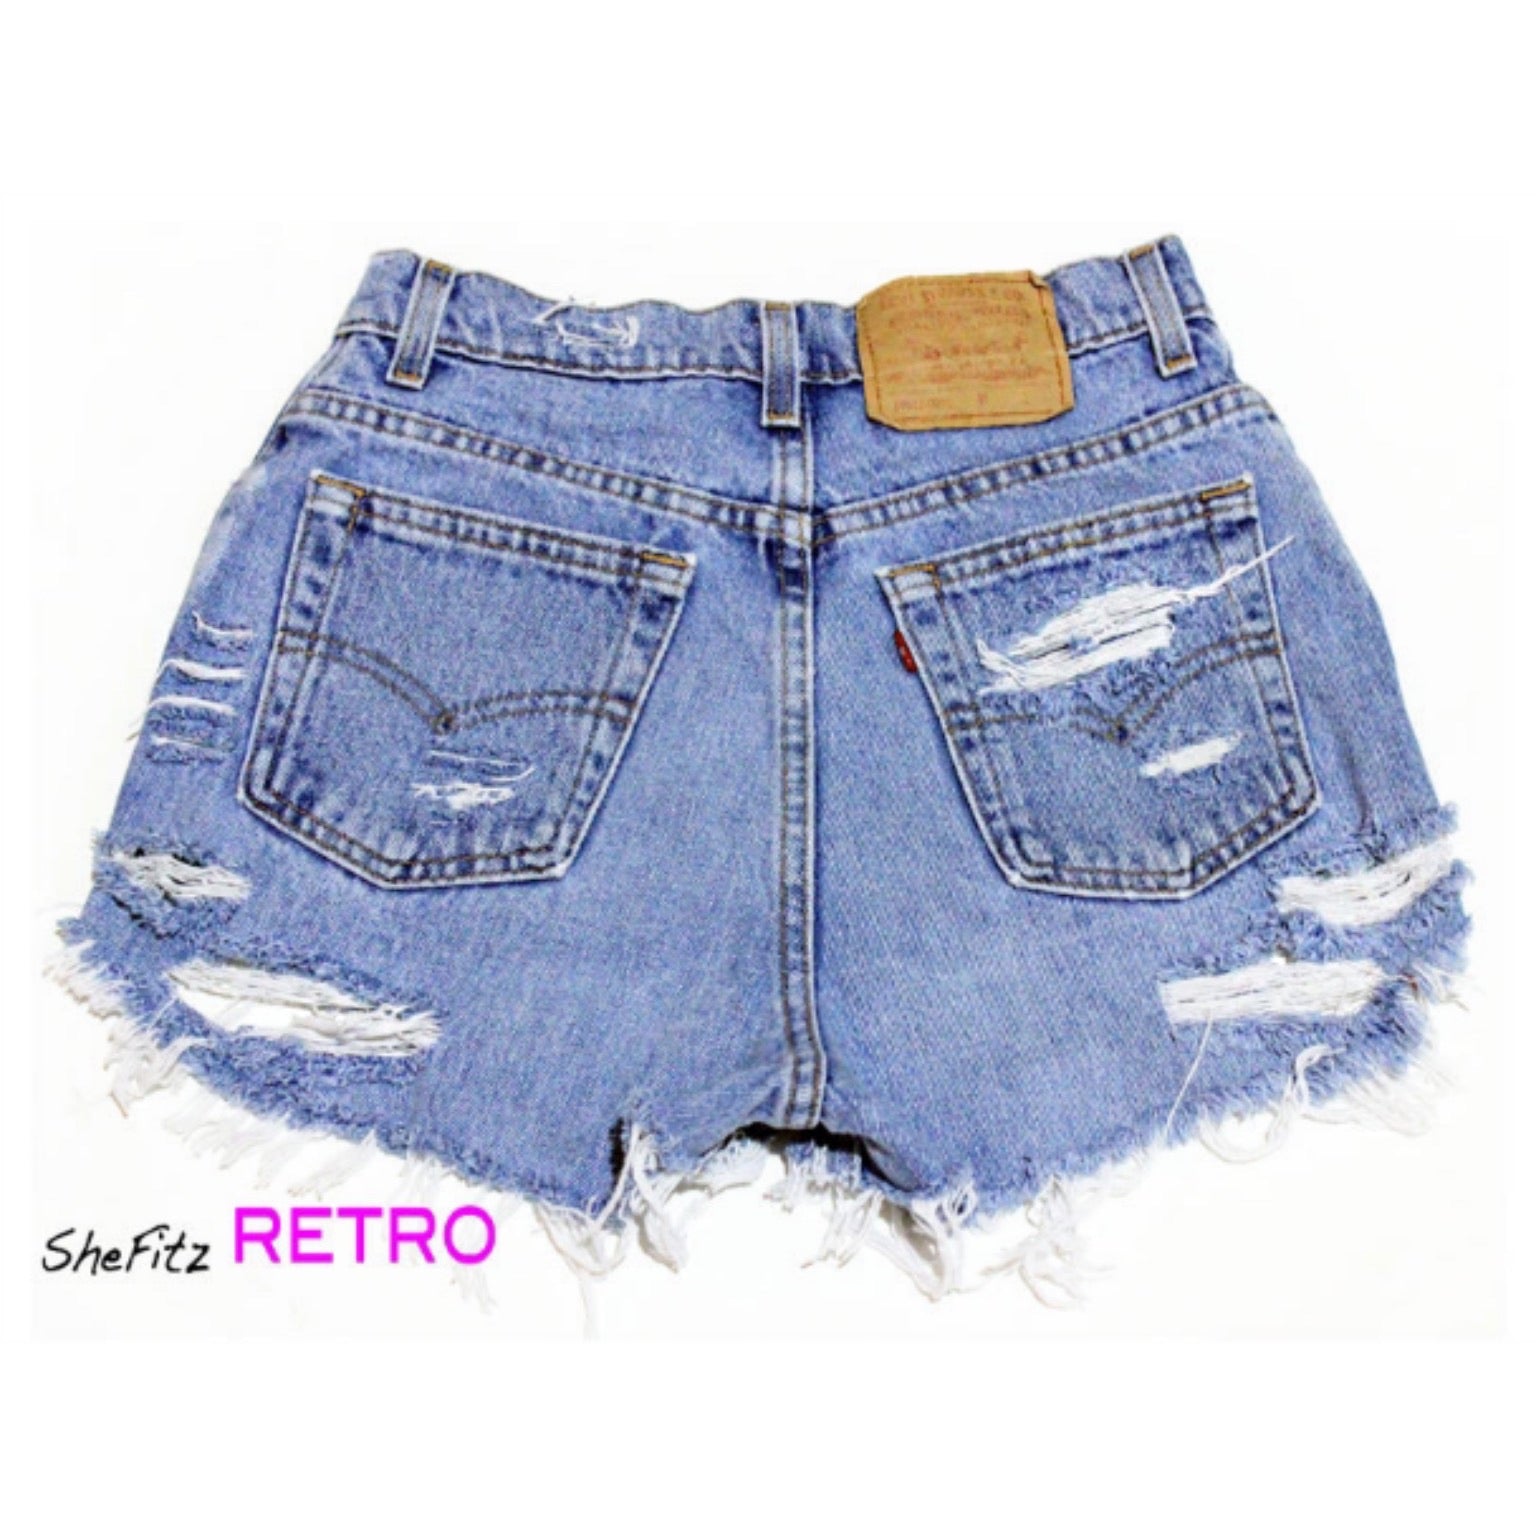 Made To Order Trashed Vintage High Waisted Cut Off Shorts